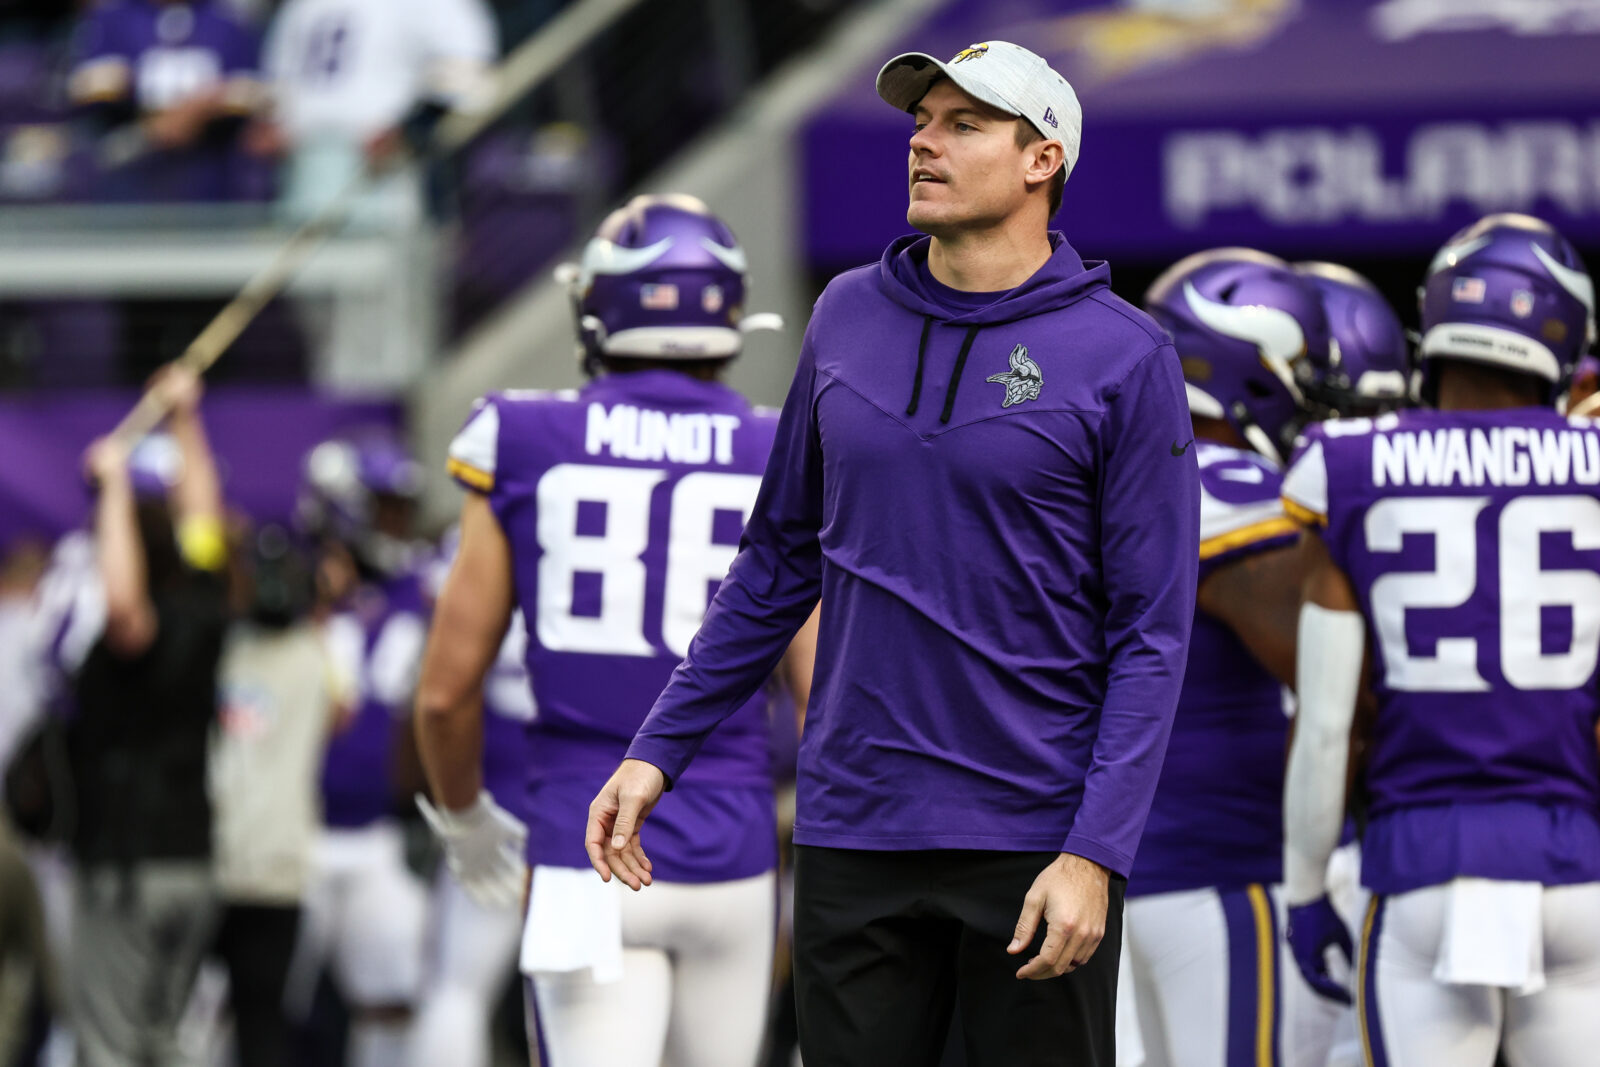 Vikings Playoff Schedule 2022 (opponents, dates, and times for